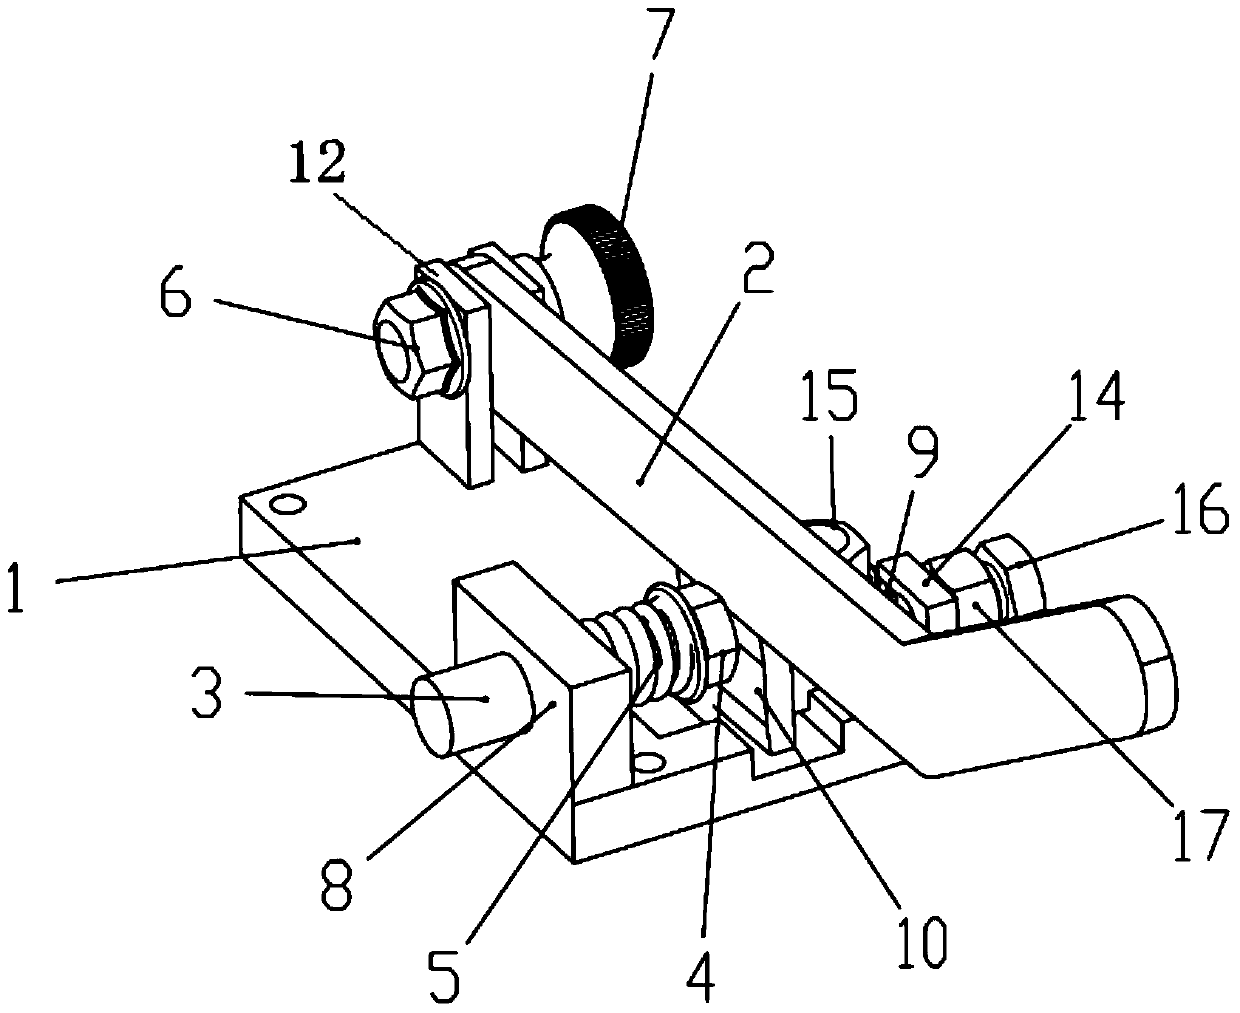 Quick workpiece positioning and clamping device capable of adjusting clamping force